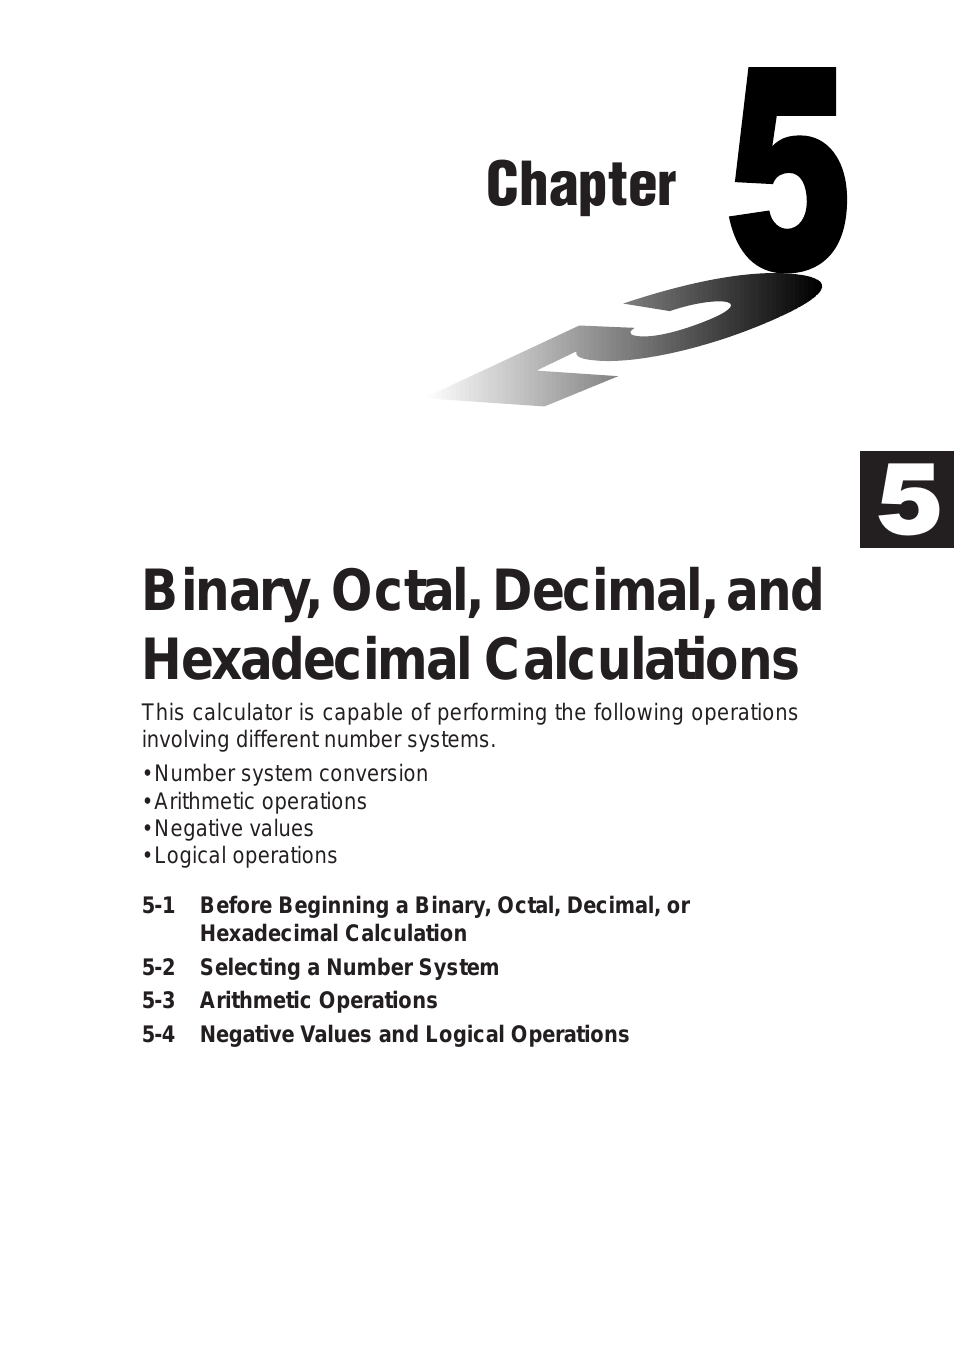 fx-9750G Binary, Octal, Decimal, and Hexadecimal Calculations (Page 1)